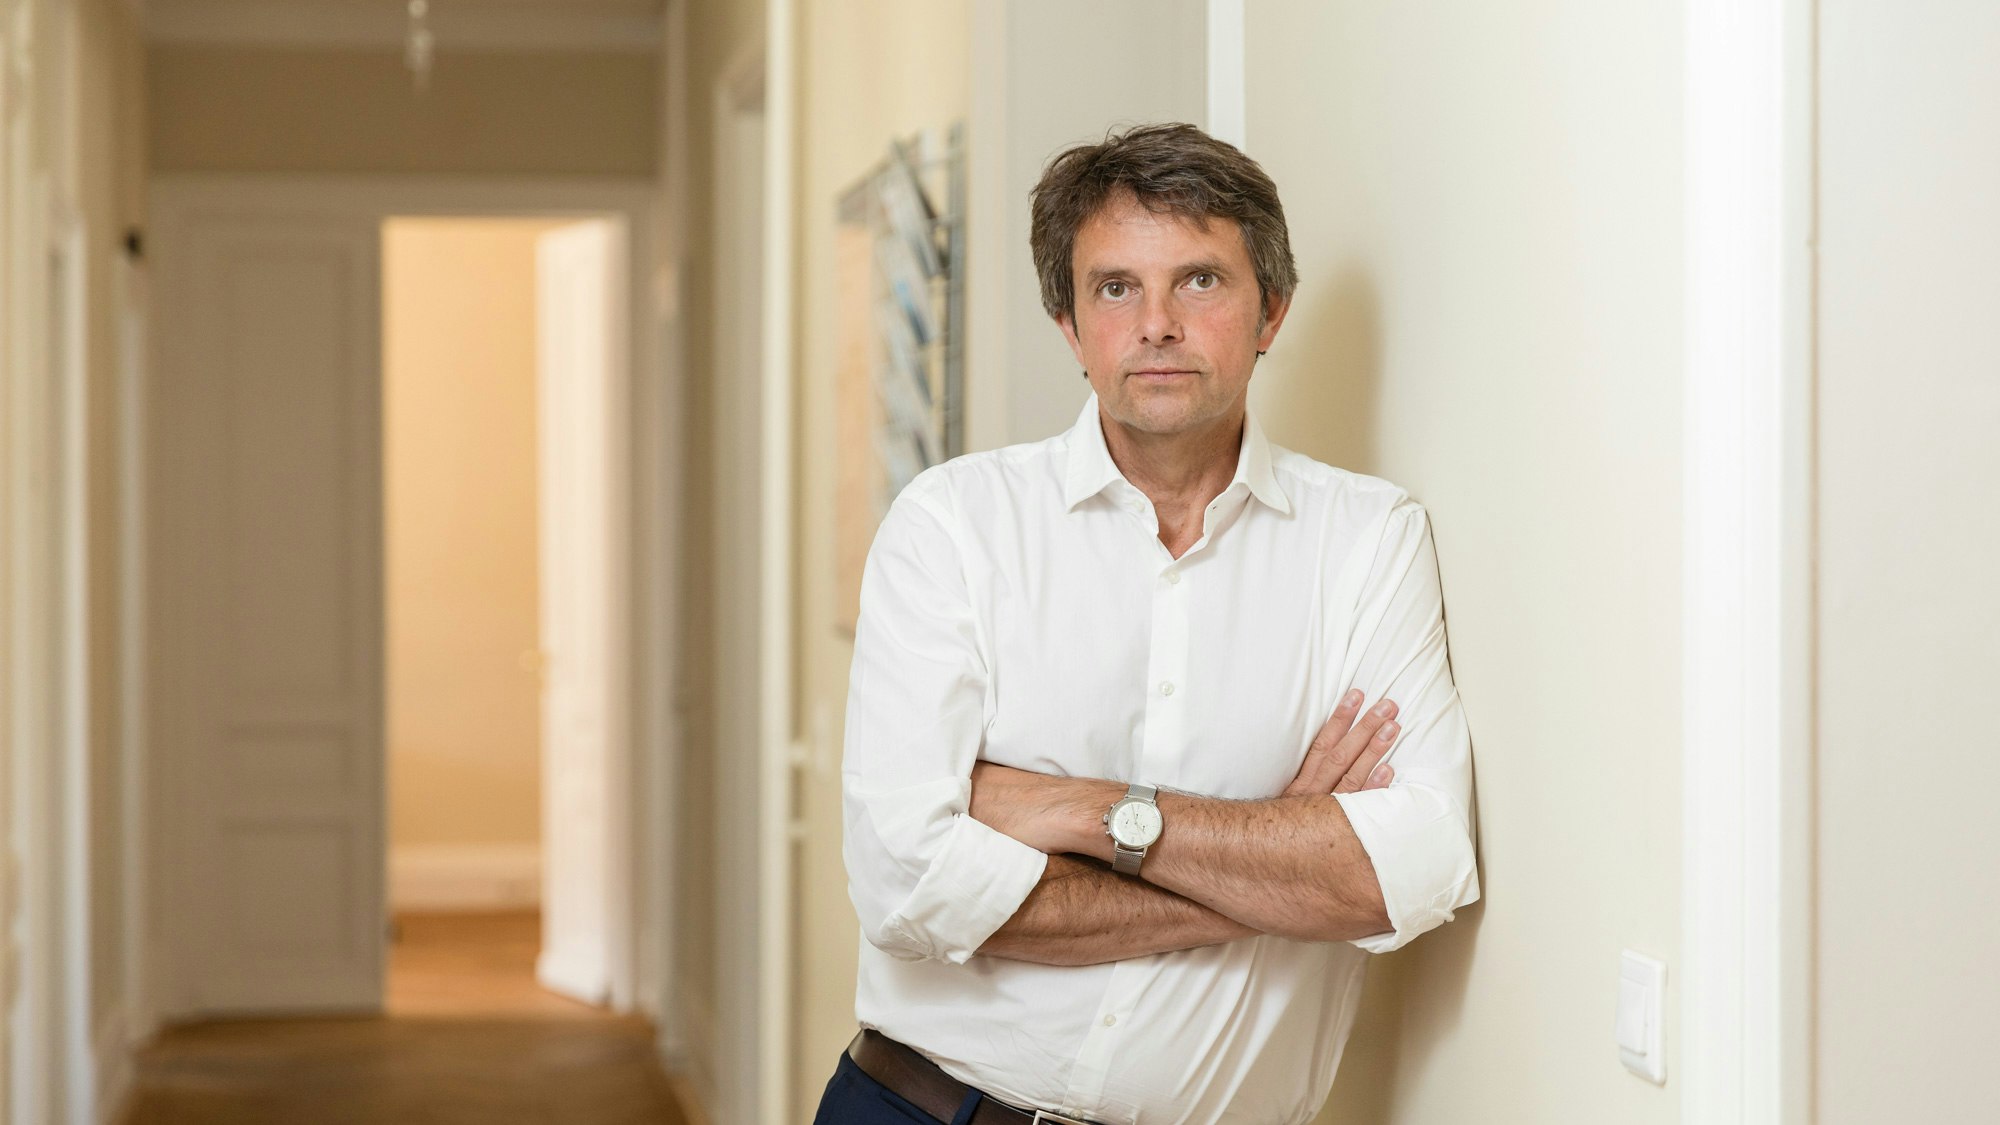 Werner Spengler standing in the hallway with arms crossed and a white shirt